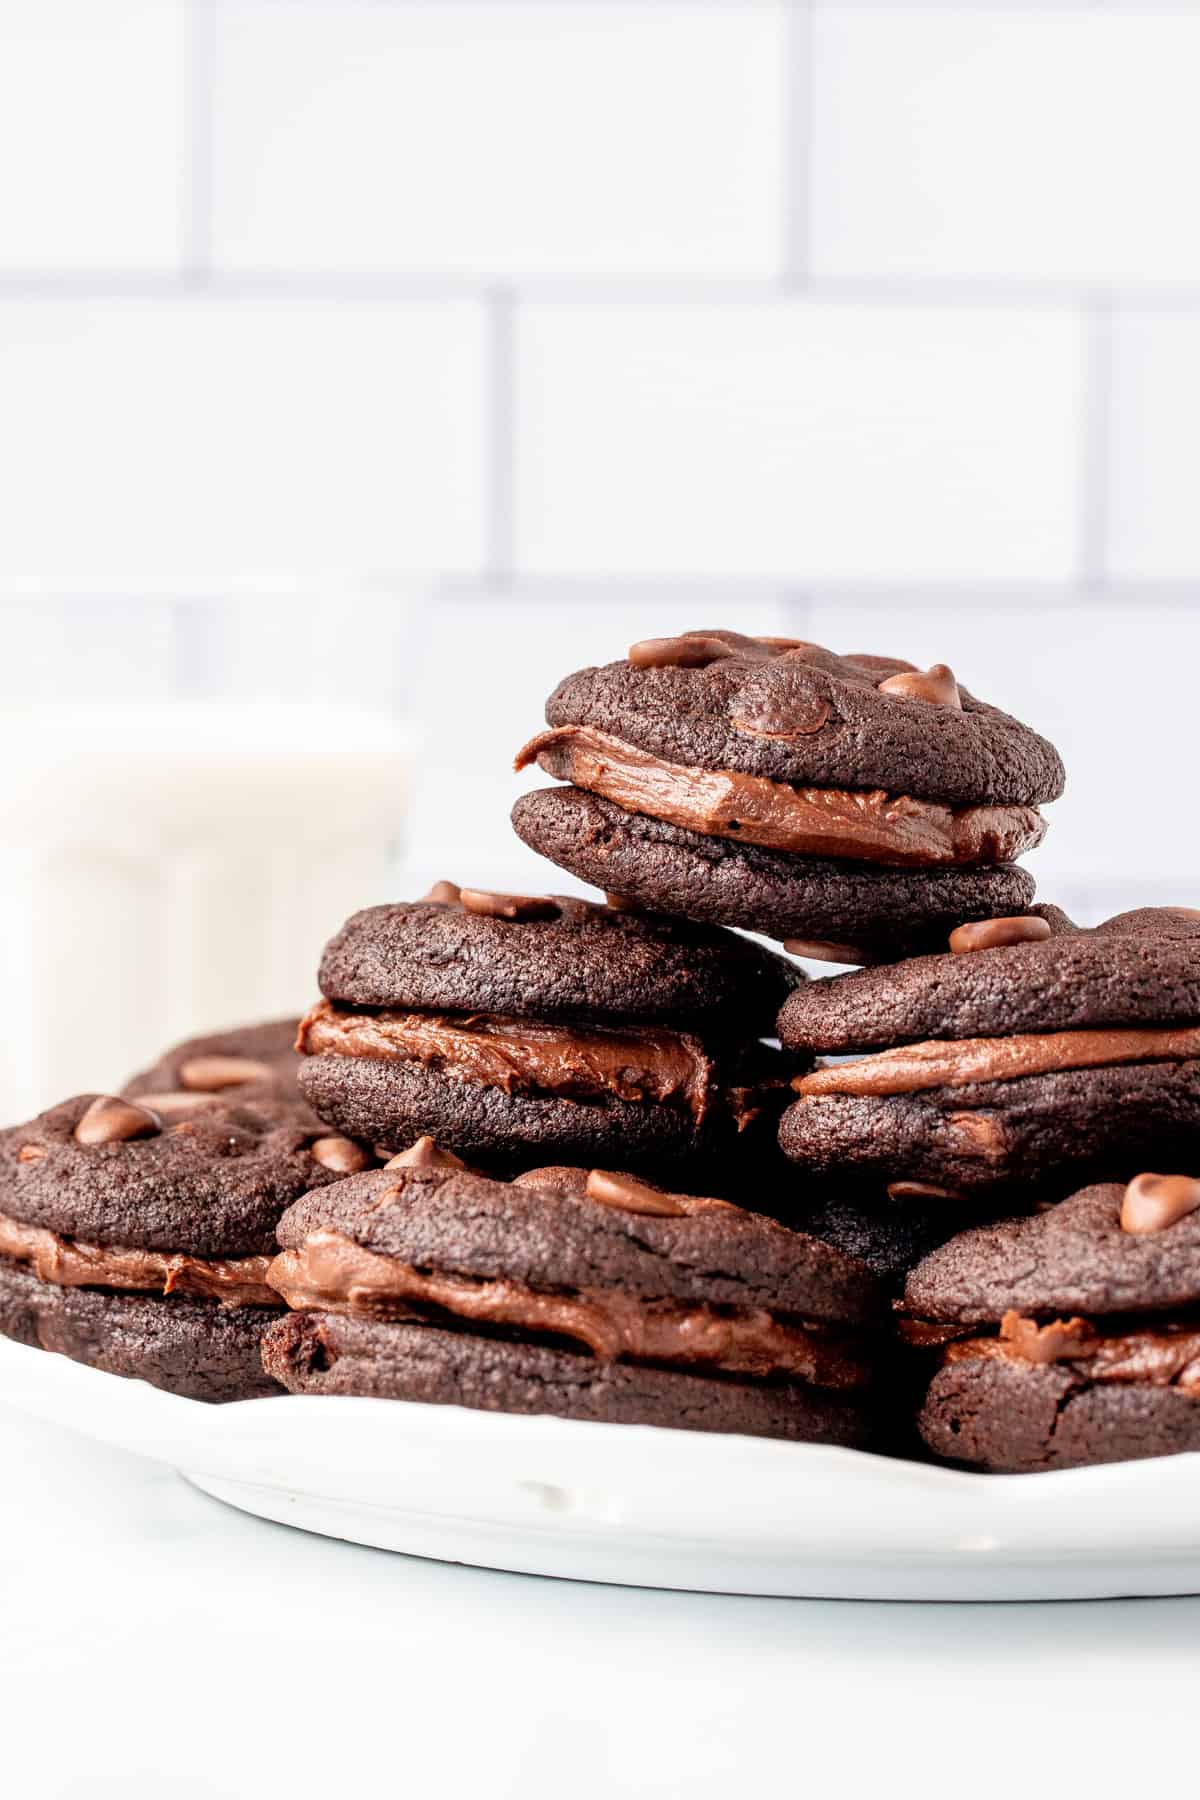 Plate of chocolate sandwich cookies with chocolate frosting with glass of milk